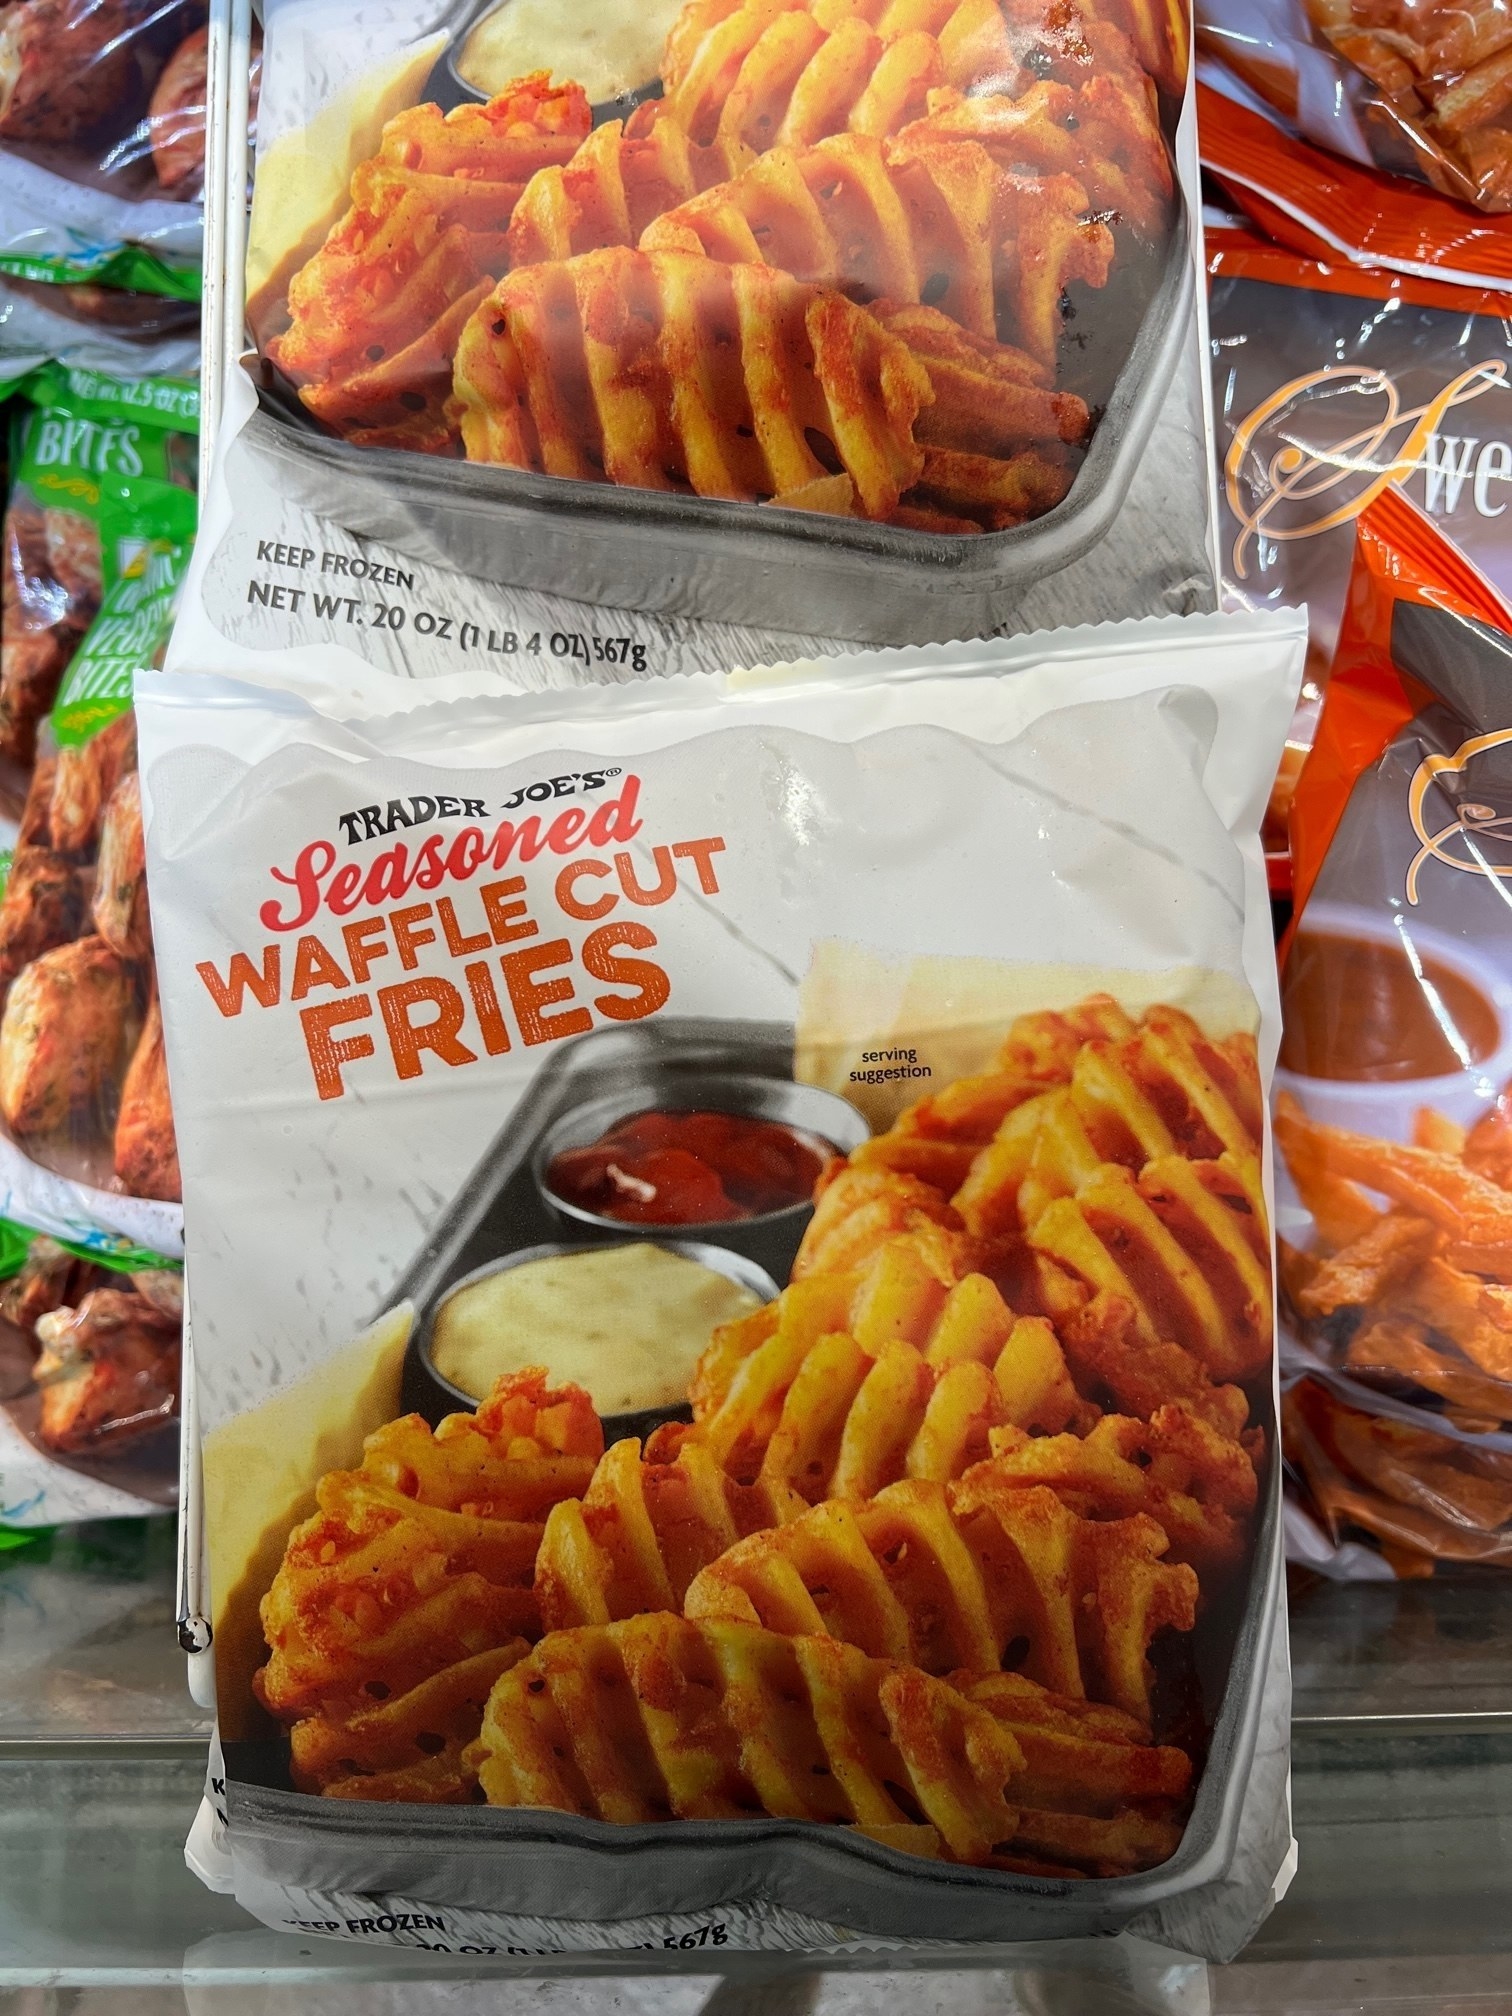 A bag of frozen waffle fries